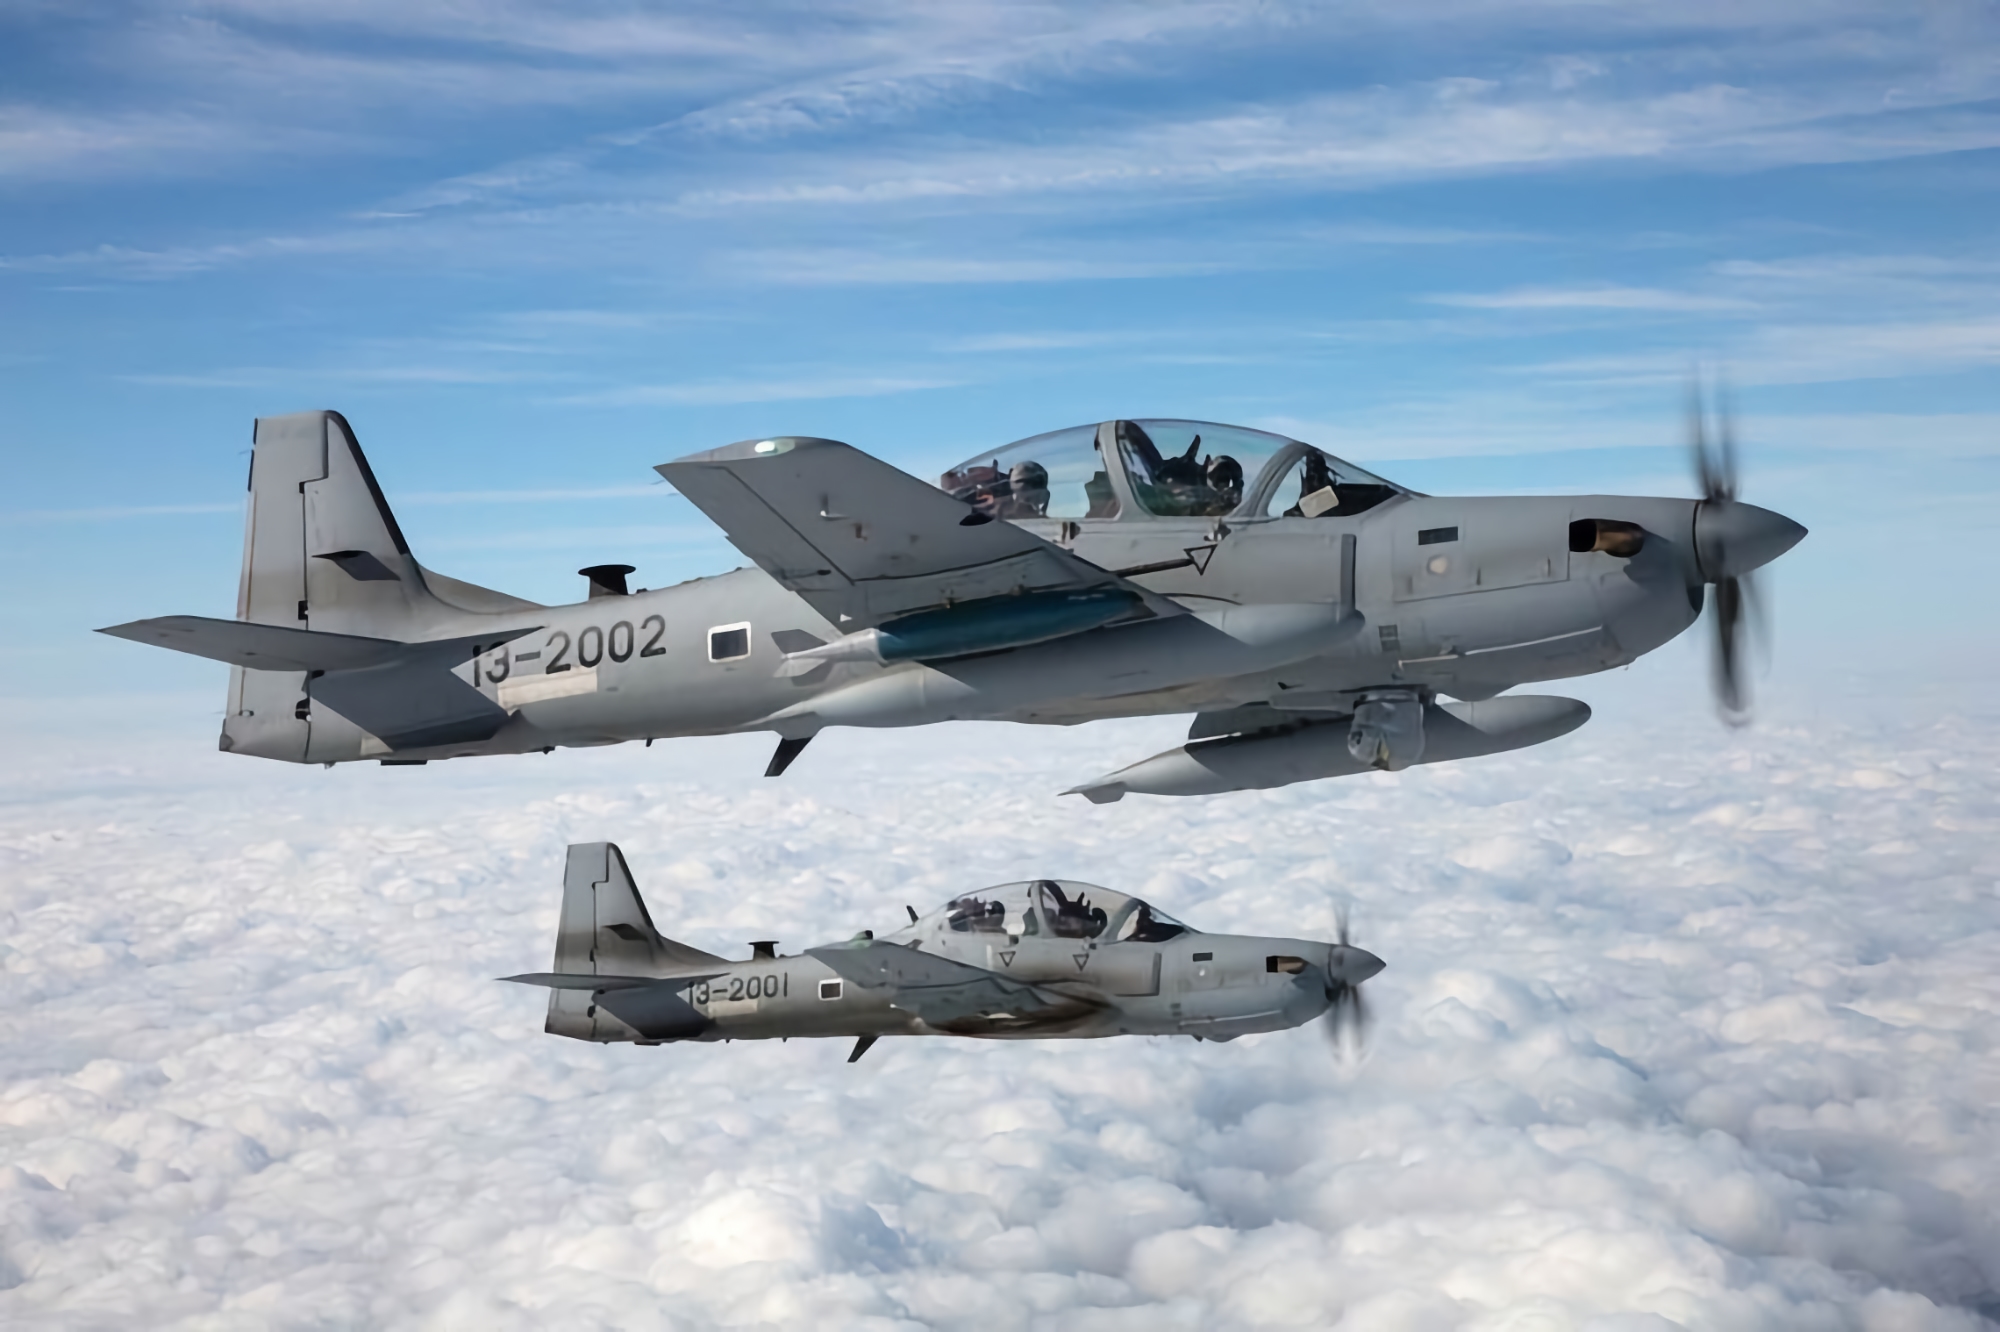 The U.S. is ready to transfer the A-29 Super Tucano and AT-6 Wolverine attack aircraft to its partners